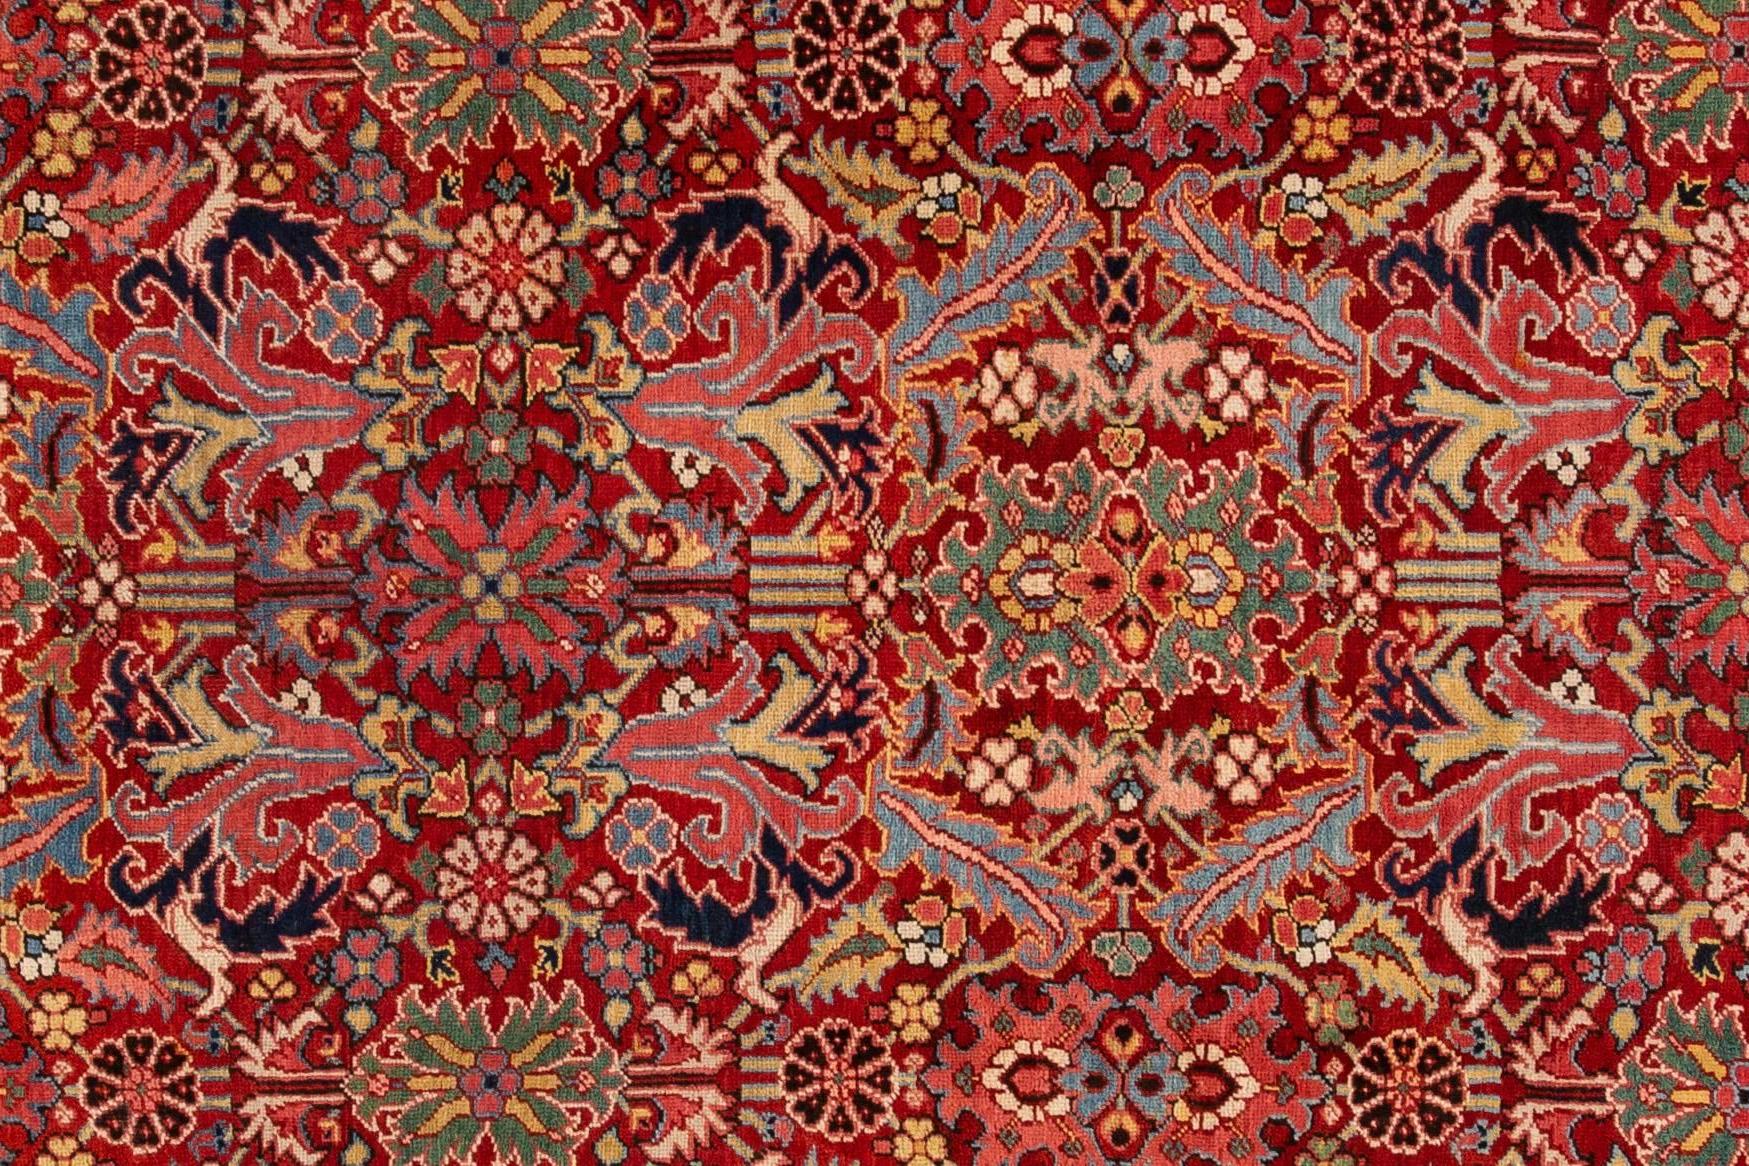 A hand-knotted wool antique Heriz rug with an all-over floral design on a red field. This rug measures 8'4